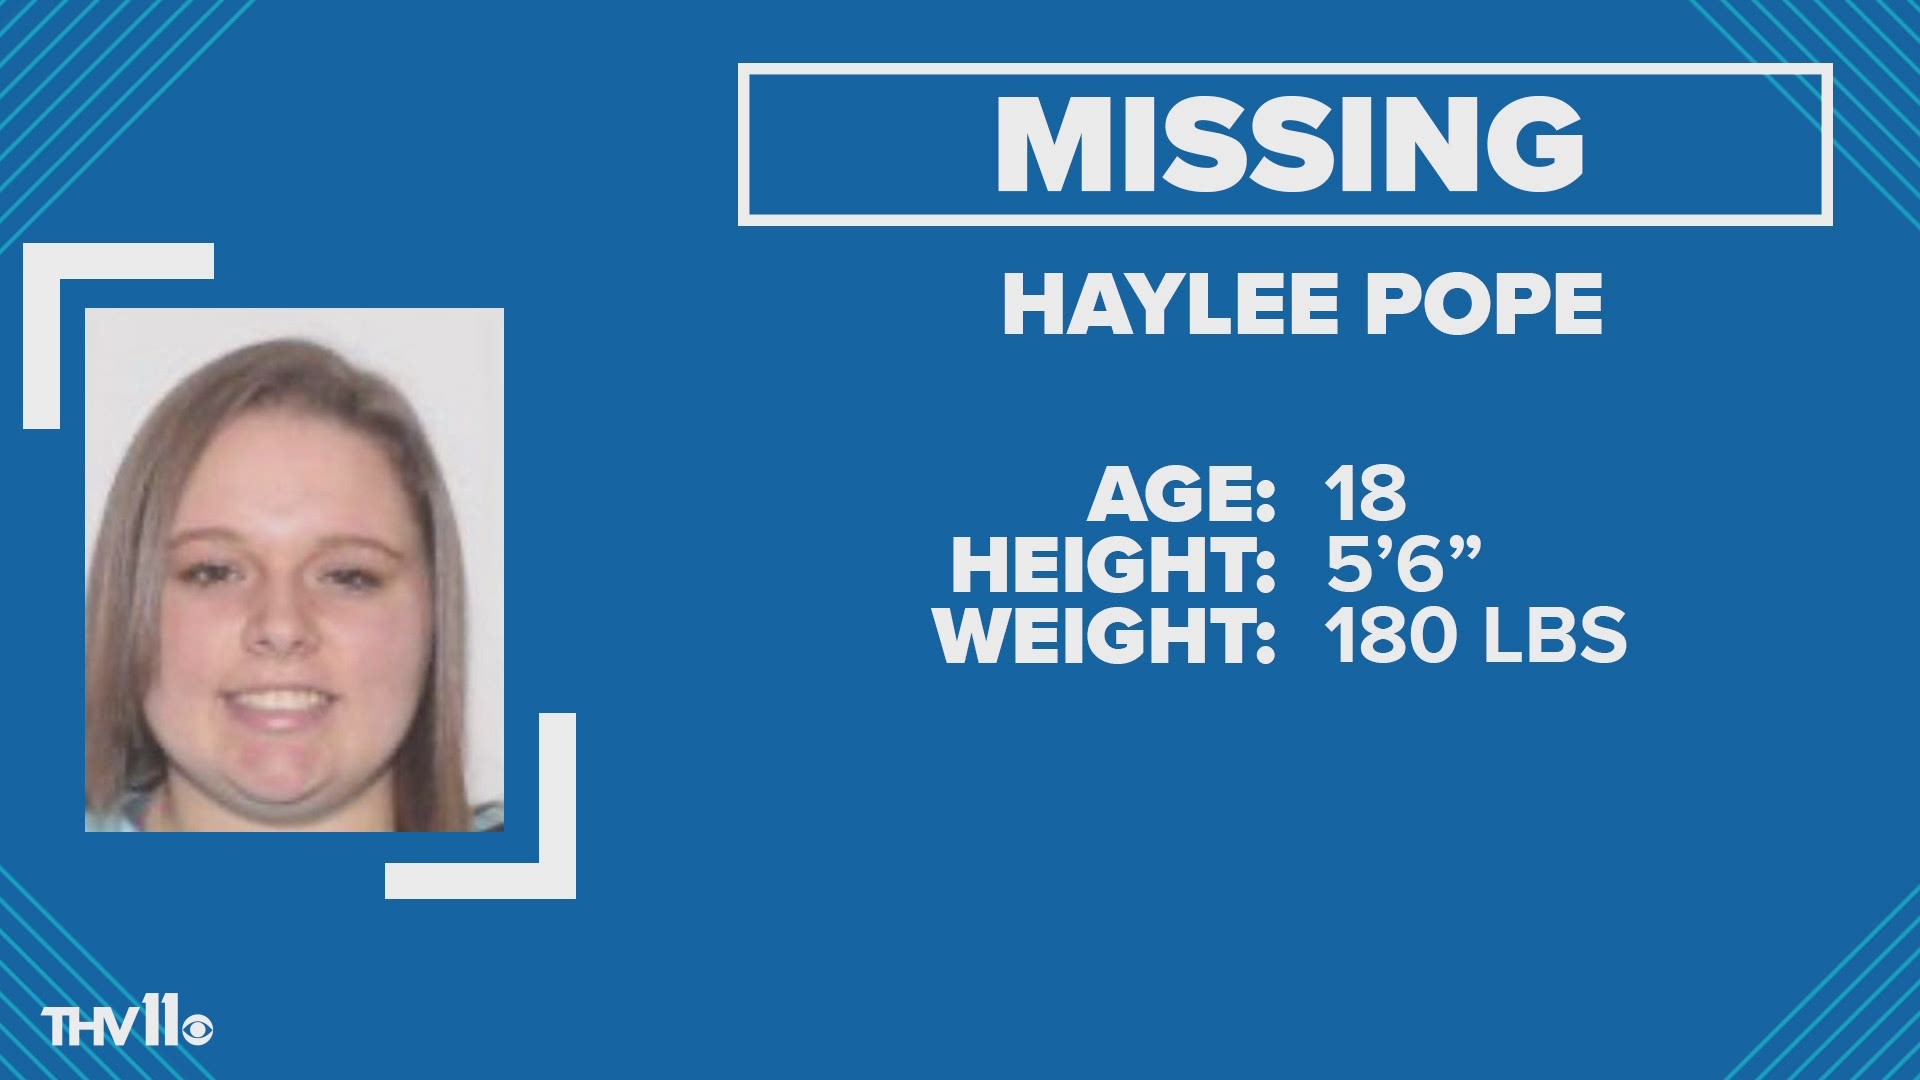 Little Rock police are looking for a missing 18-year-old.